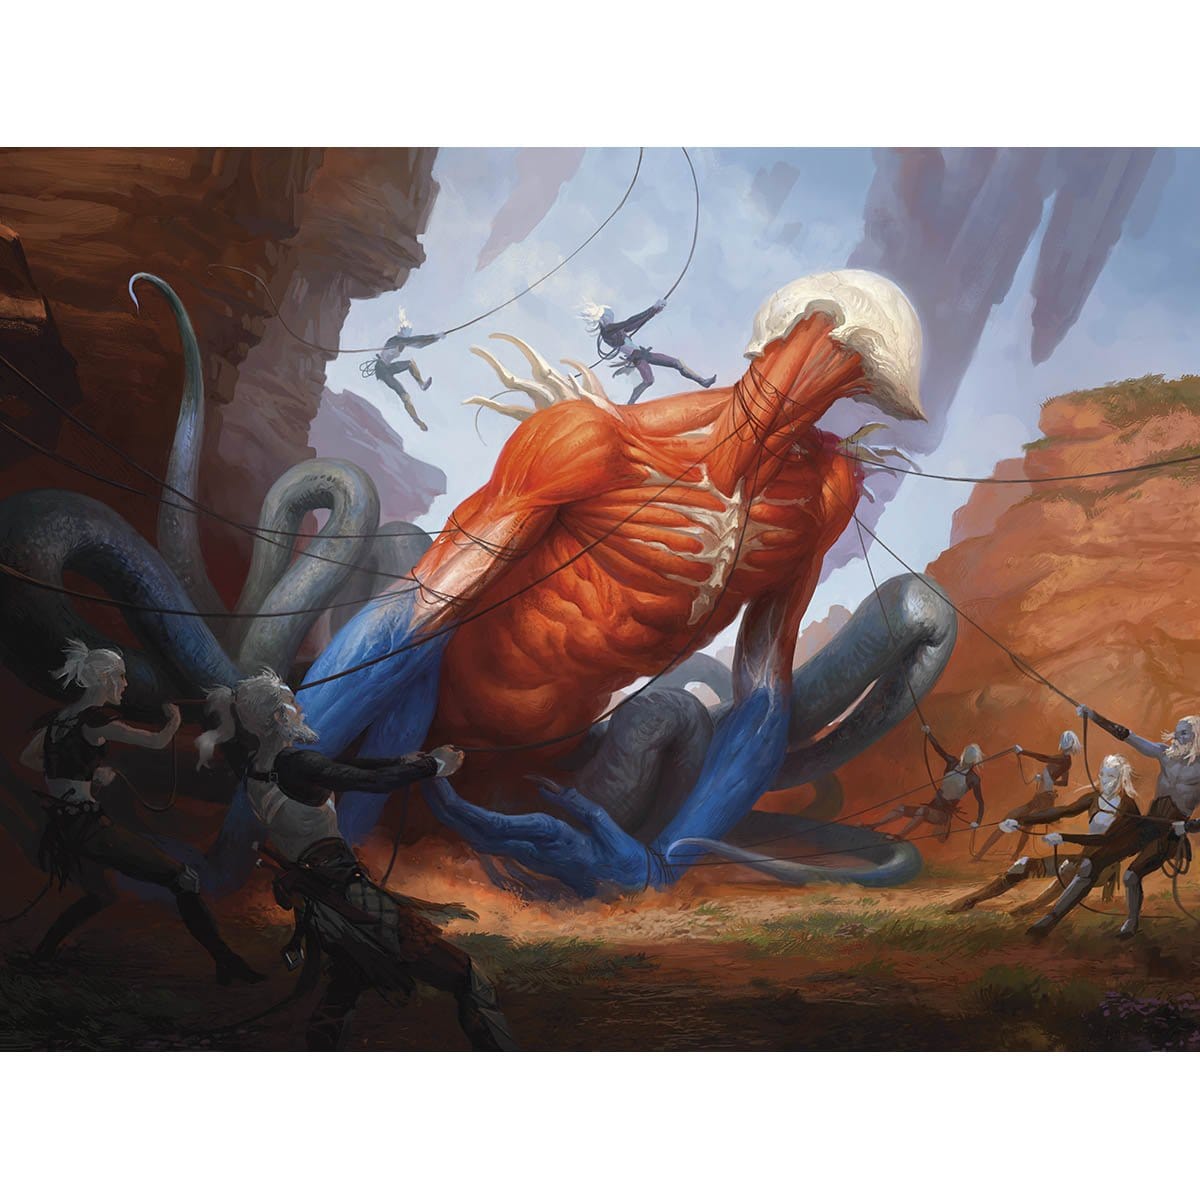 Smite the Monstrous Print - Print - Original Magic Art - Accessories for Magic the Gathering and other card games